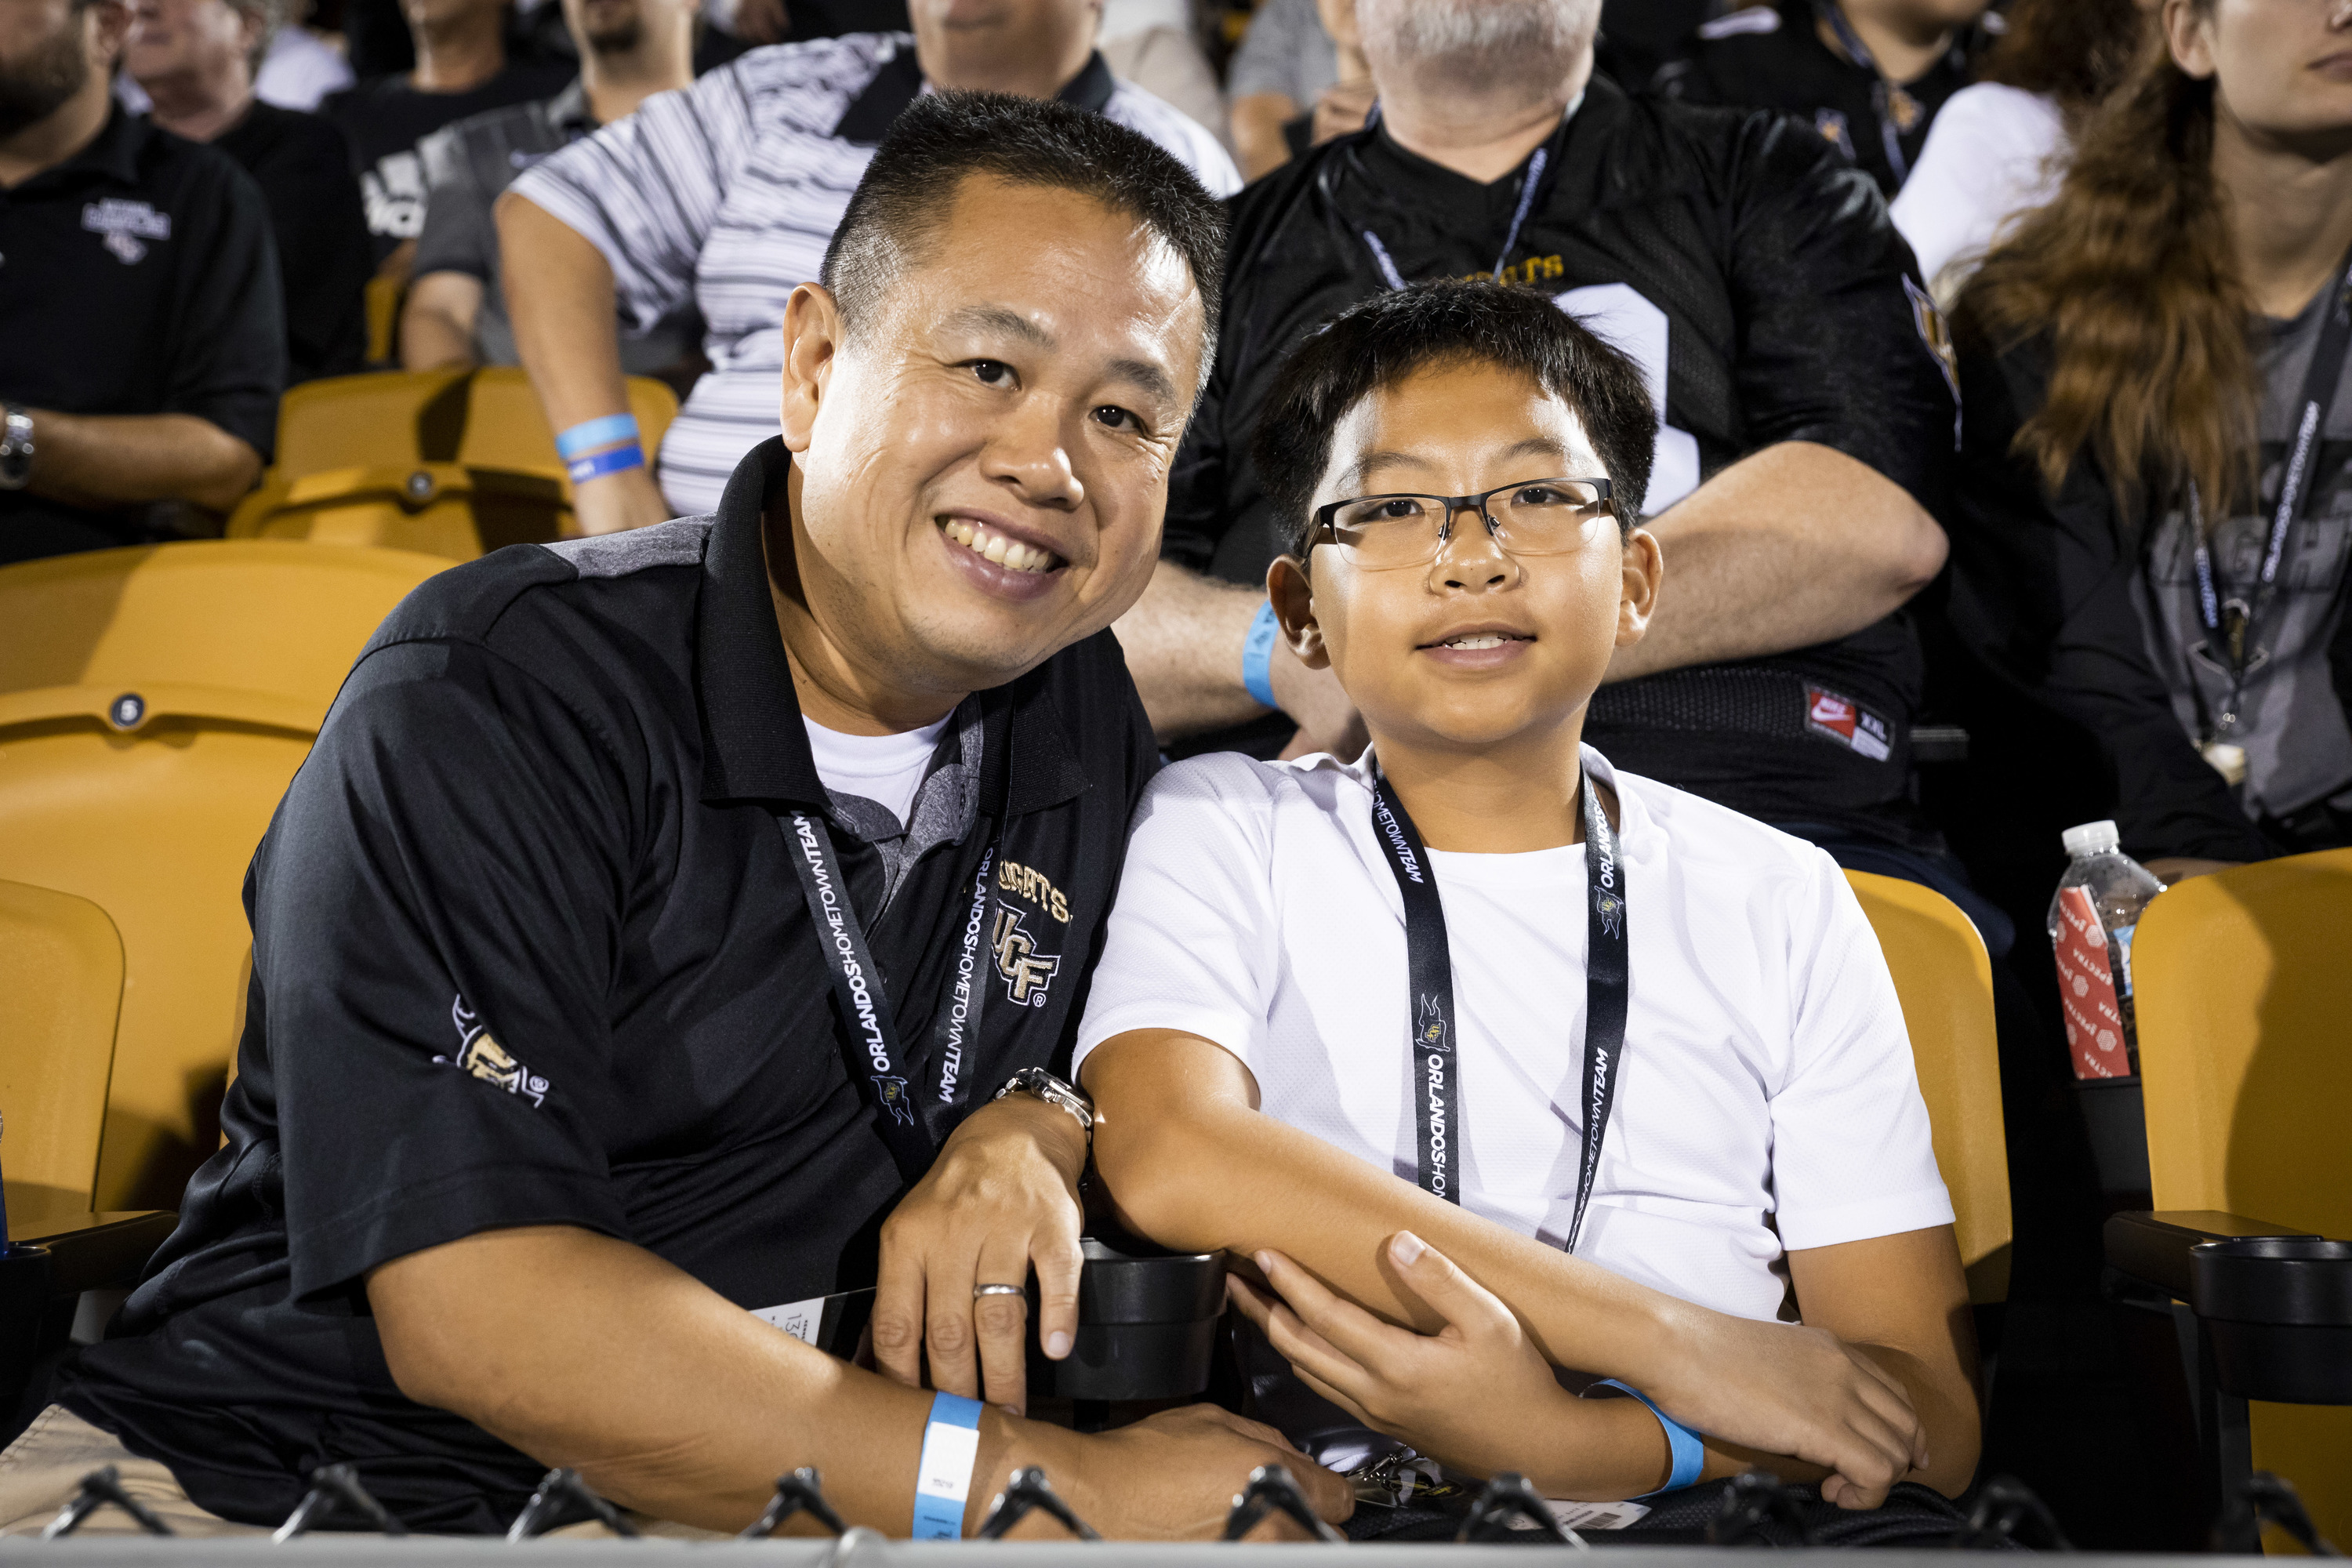 student at sporting event with child